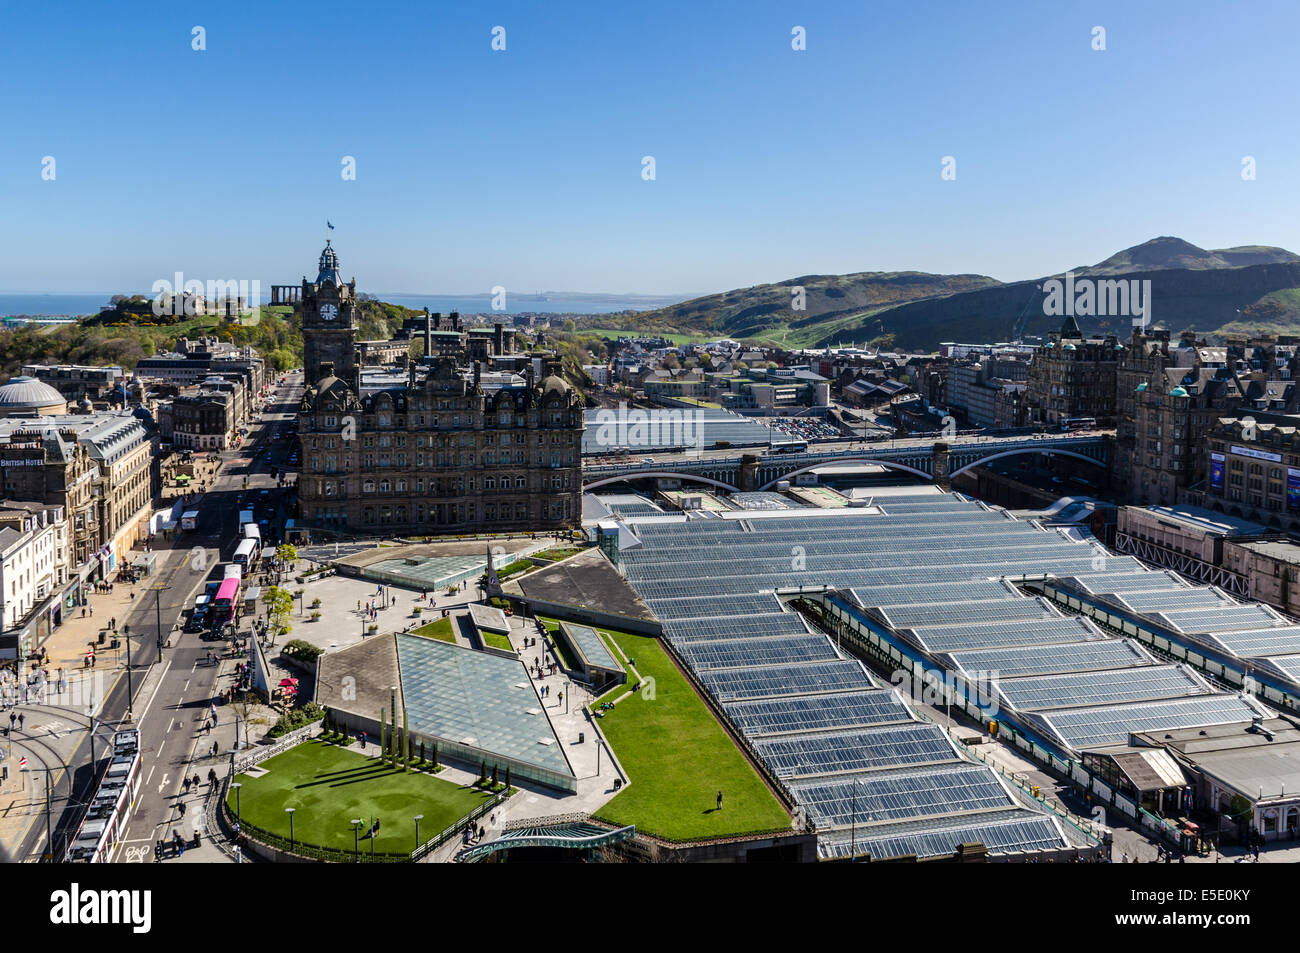 Looking East across Edinburgh to the Balmoral Hotel, Waverley Railway Station, North Bridge, Old Town and Arthur's Seat. Stock Photo